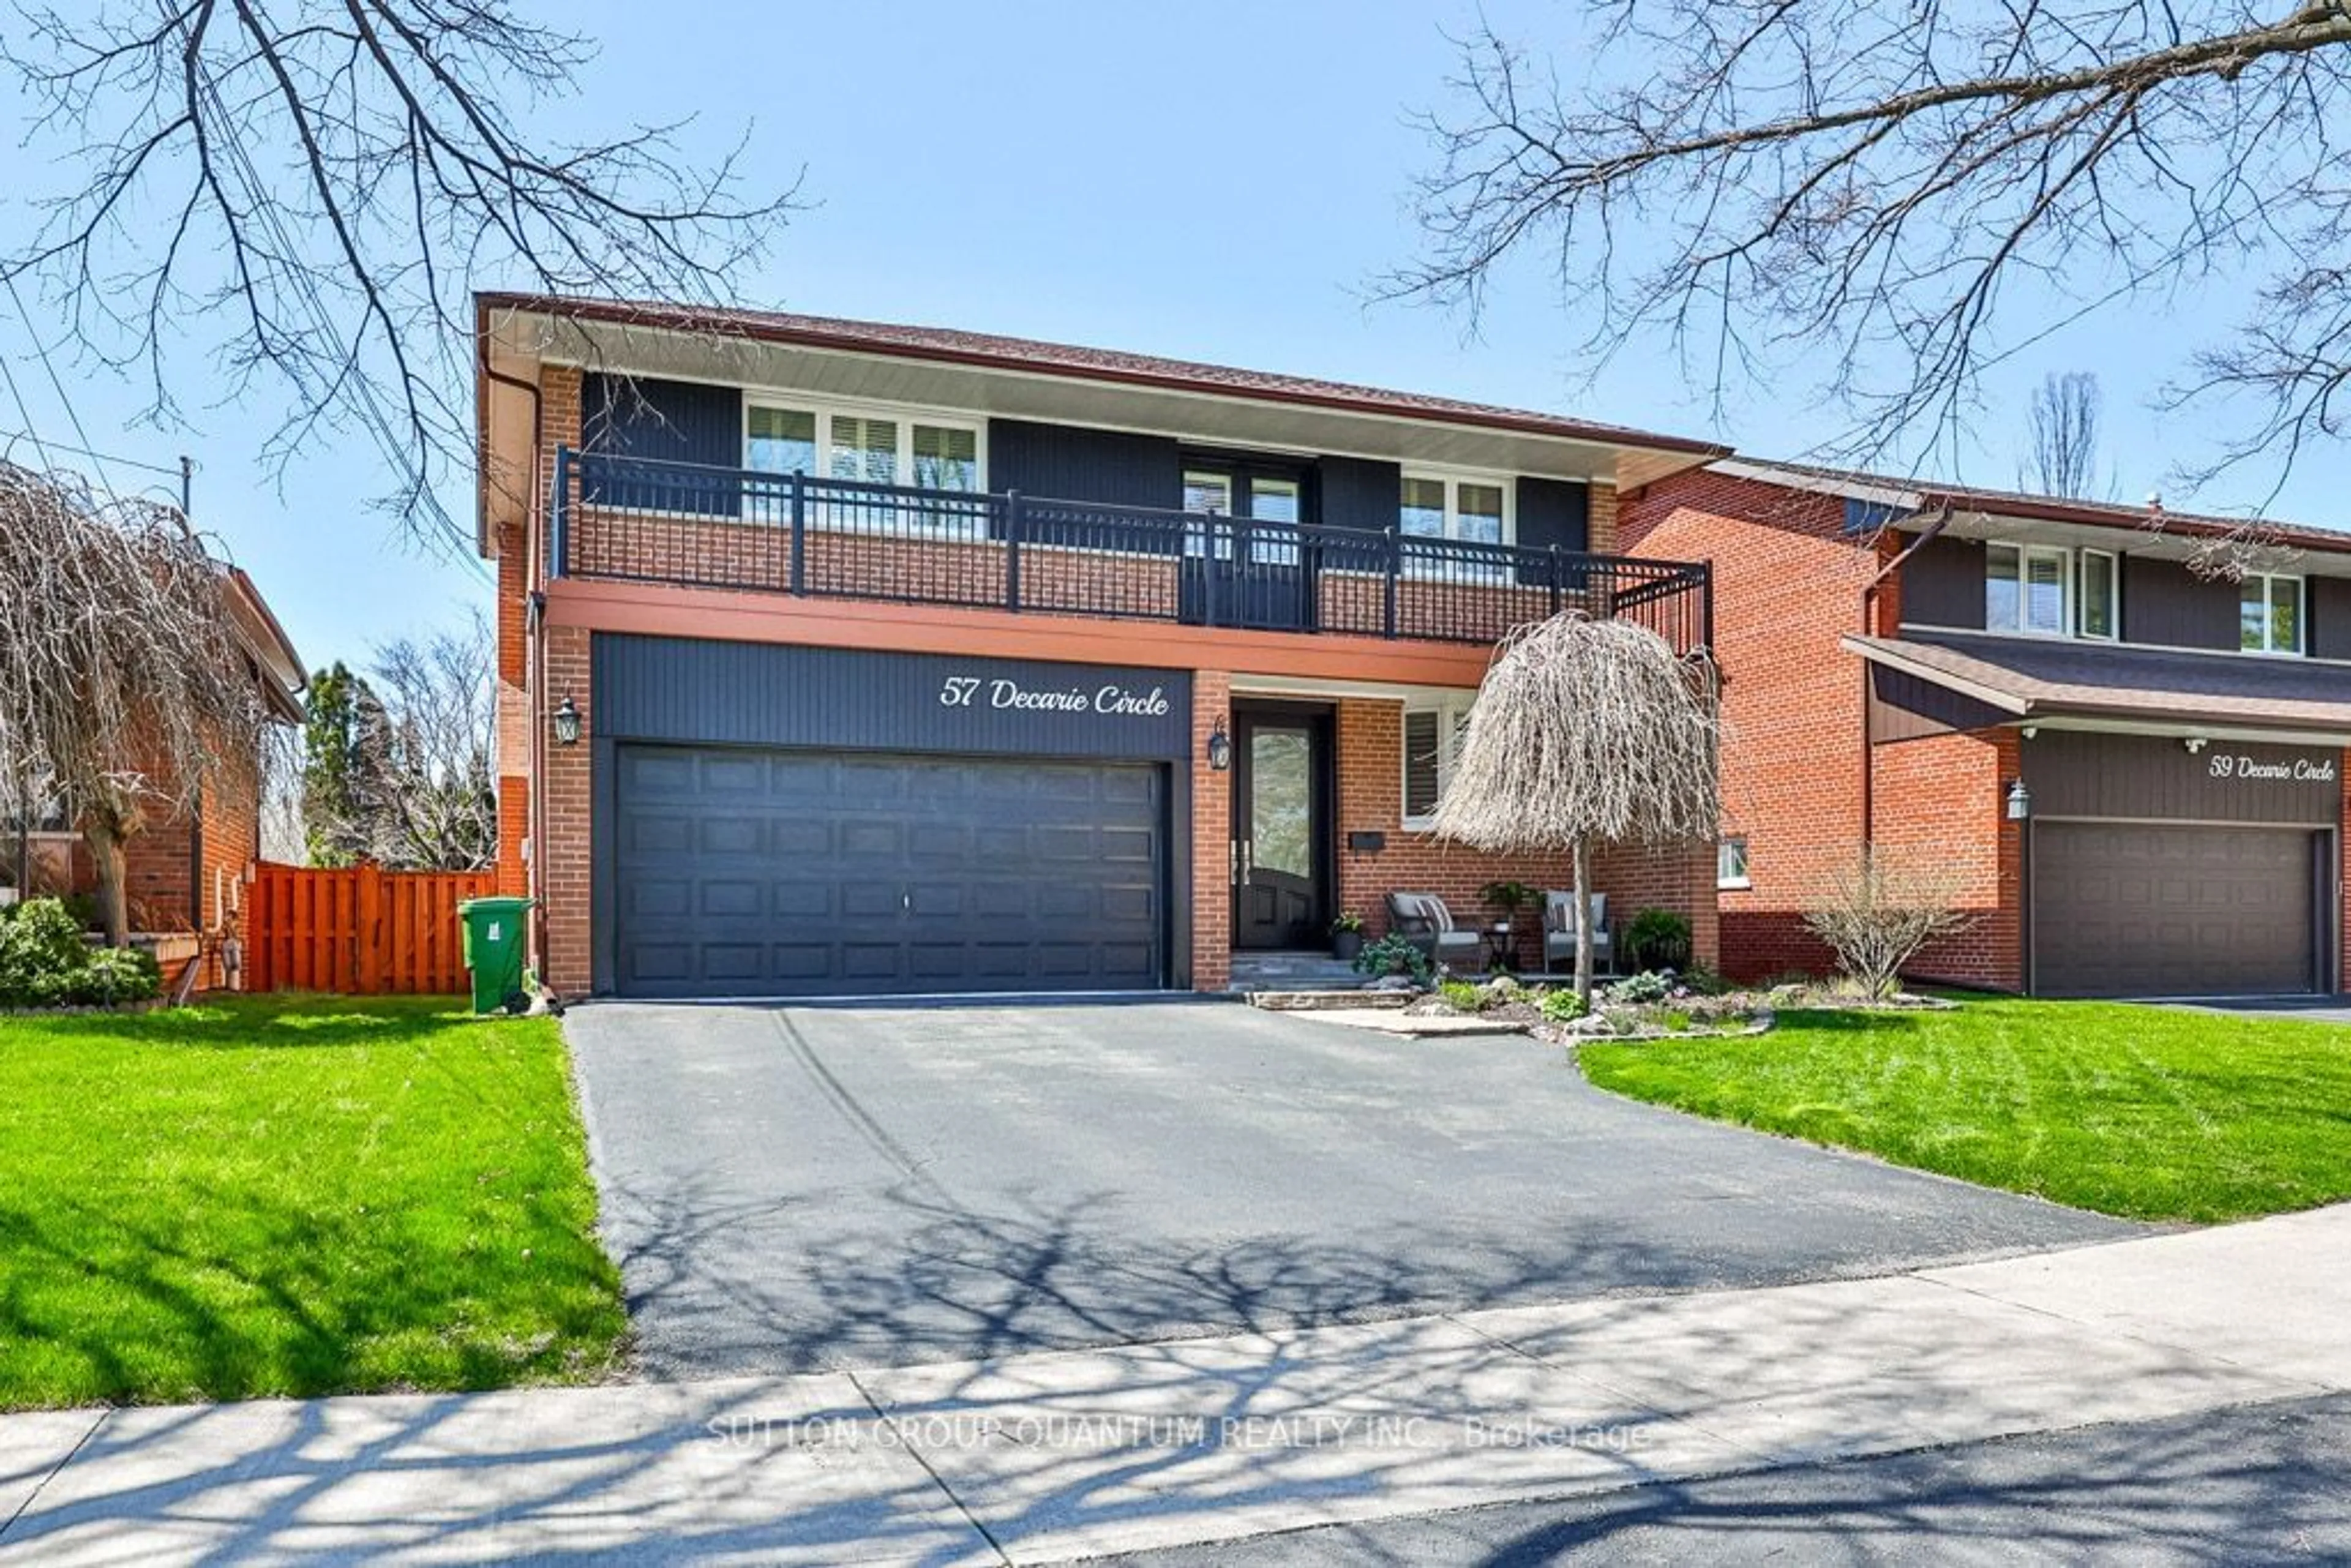 Home with brick exterior material for 57 Decarie Circ, Toronto Ontario M9B 3J1